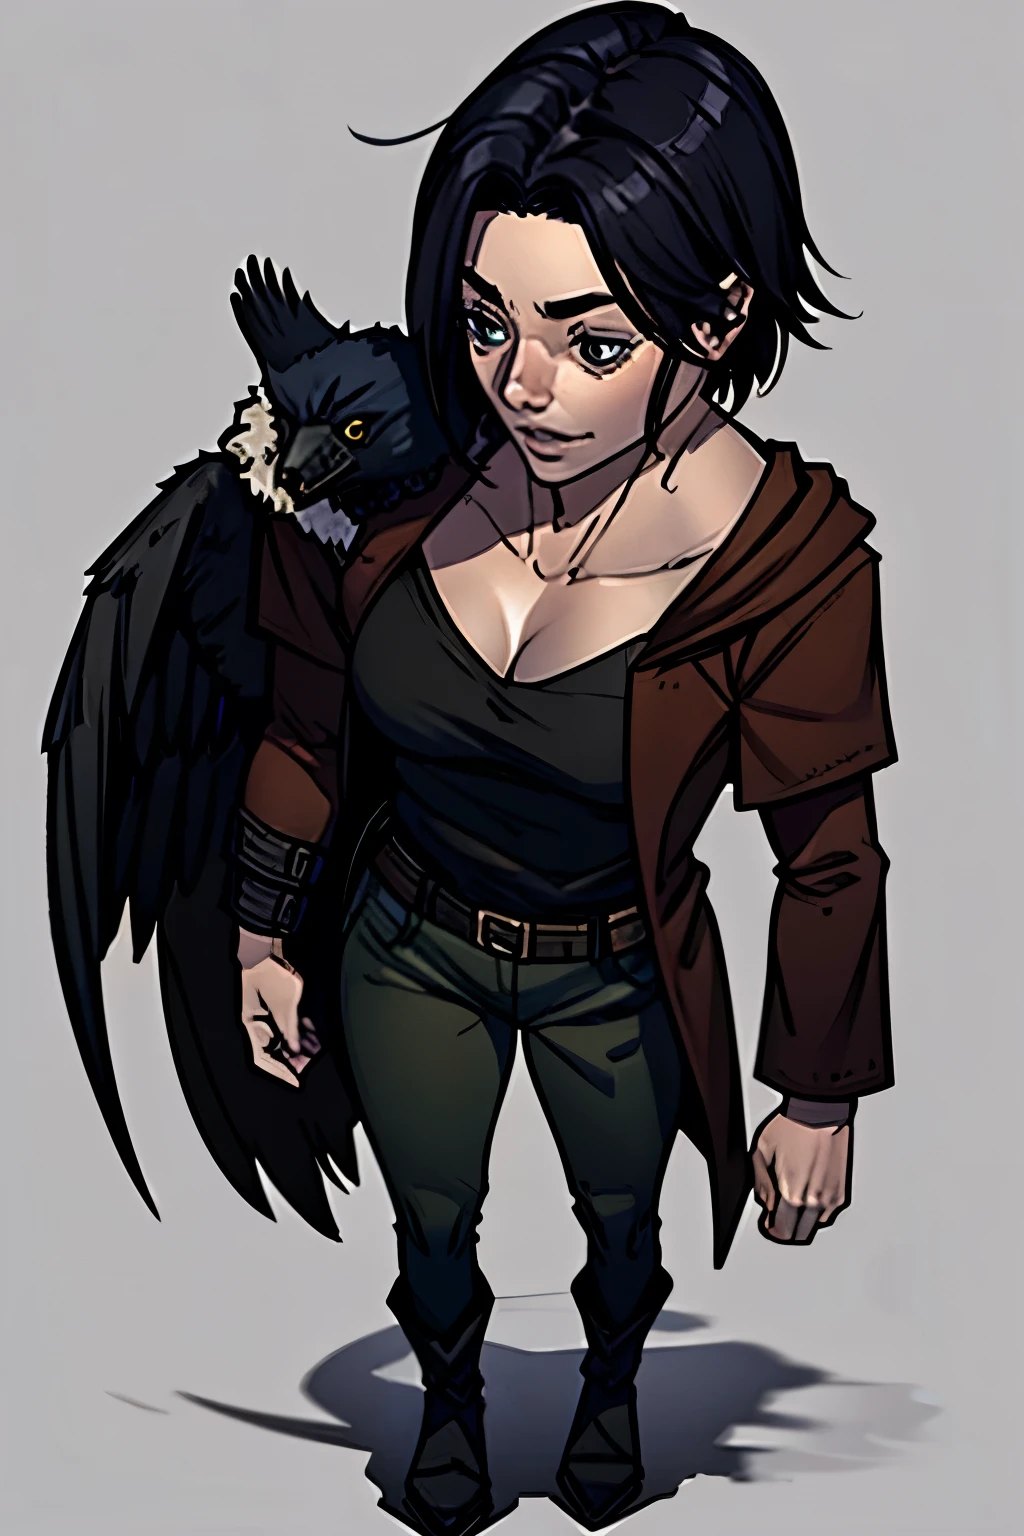 I want a human character, with raven on shoulder and black medieval clothes,in a hunting position, with a look of looking for something, showing the whole body, but walking. little crow on the shoulder, the human has the crow as a pet, I want the image without background